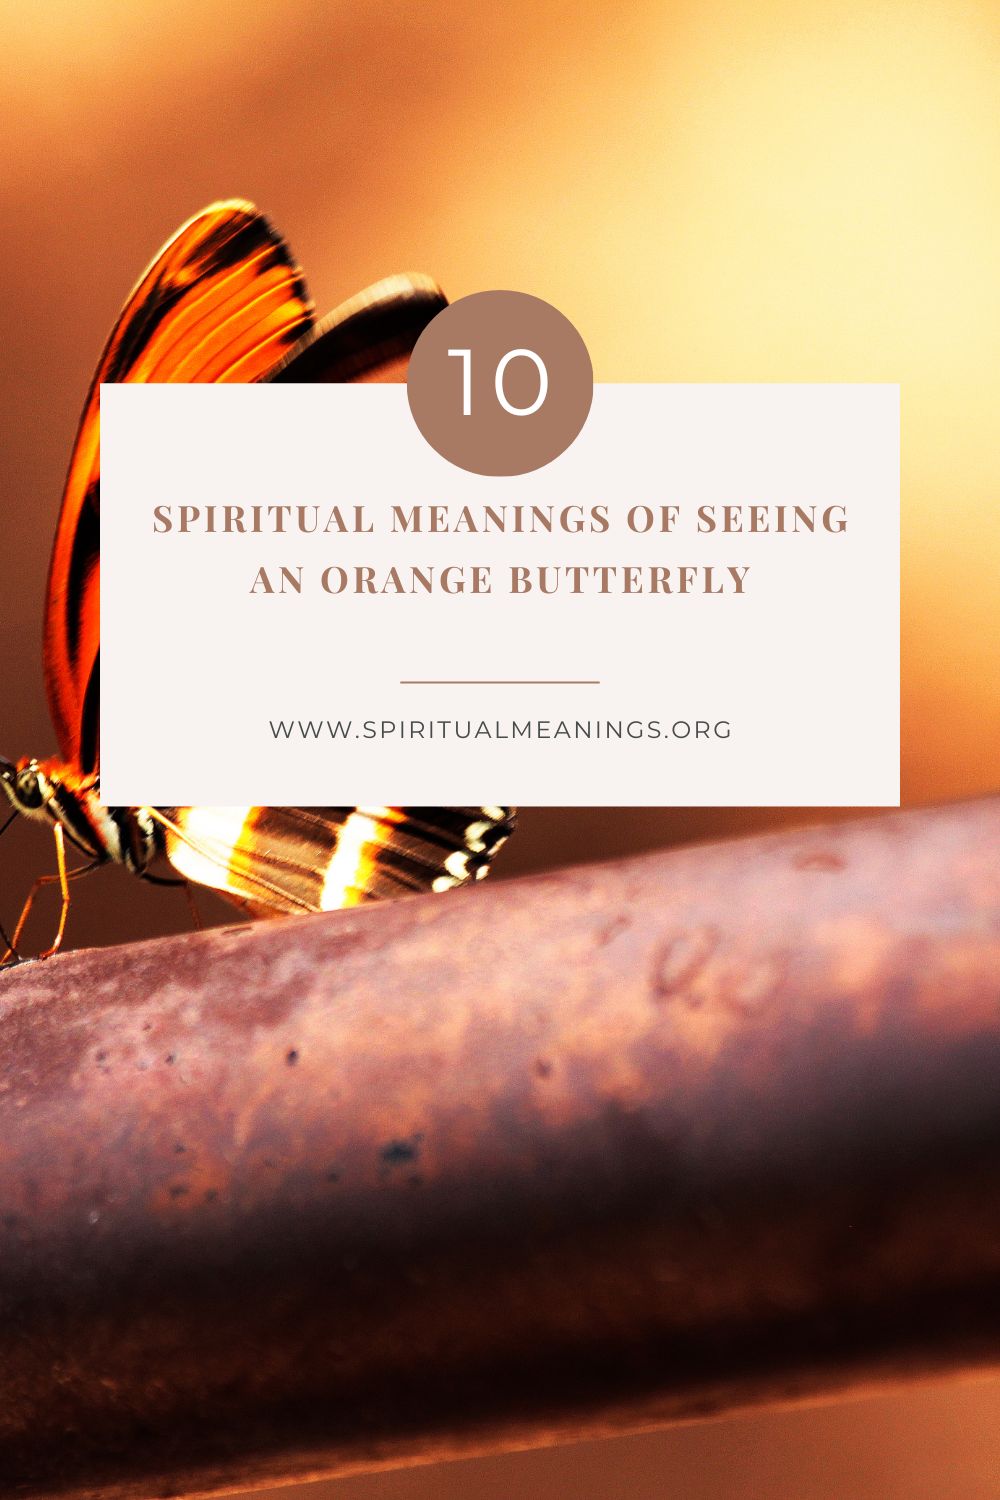 10 Spiritual Meanings of Seeing An Orange Butterfly